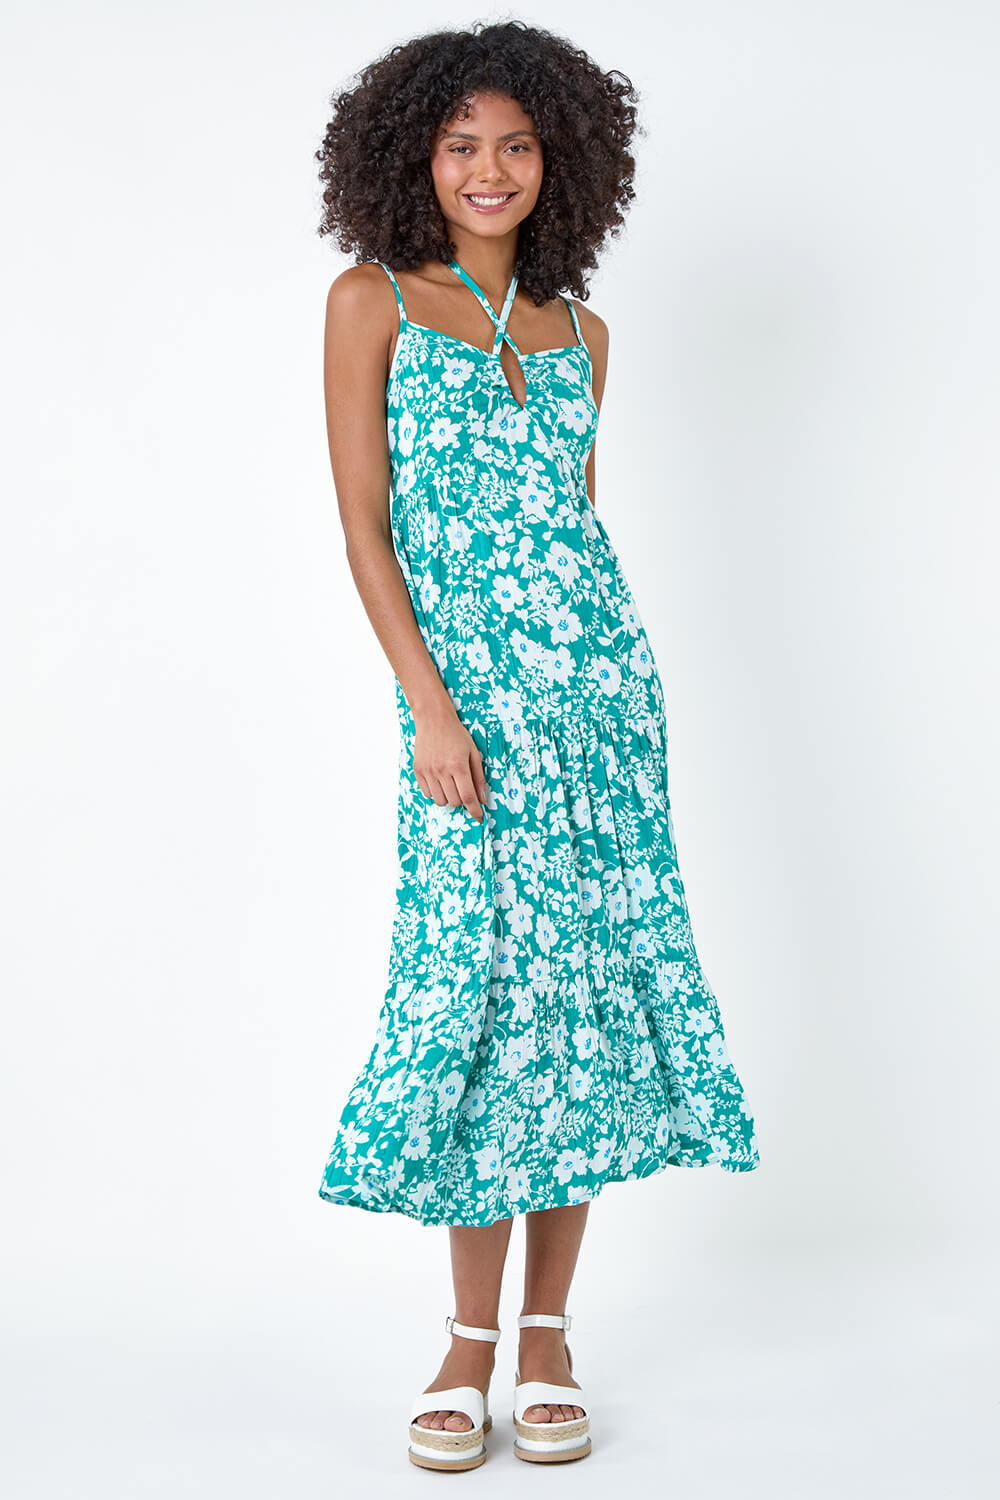 Turquoise Floral Strappy Cross Over Midi Dress, Image 2 of 5